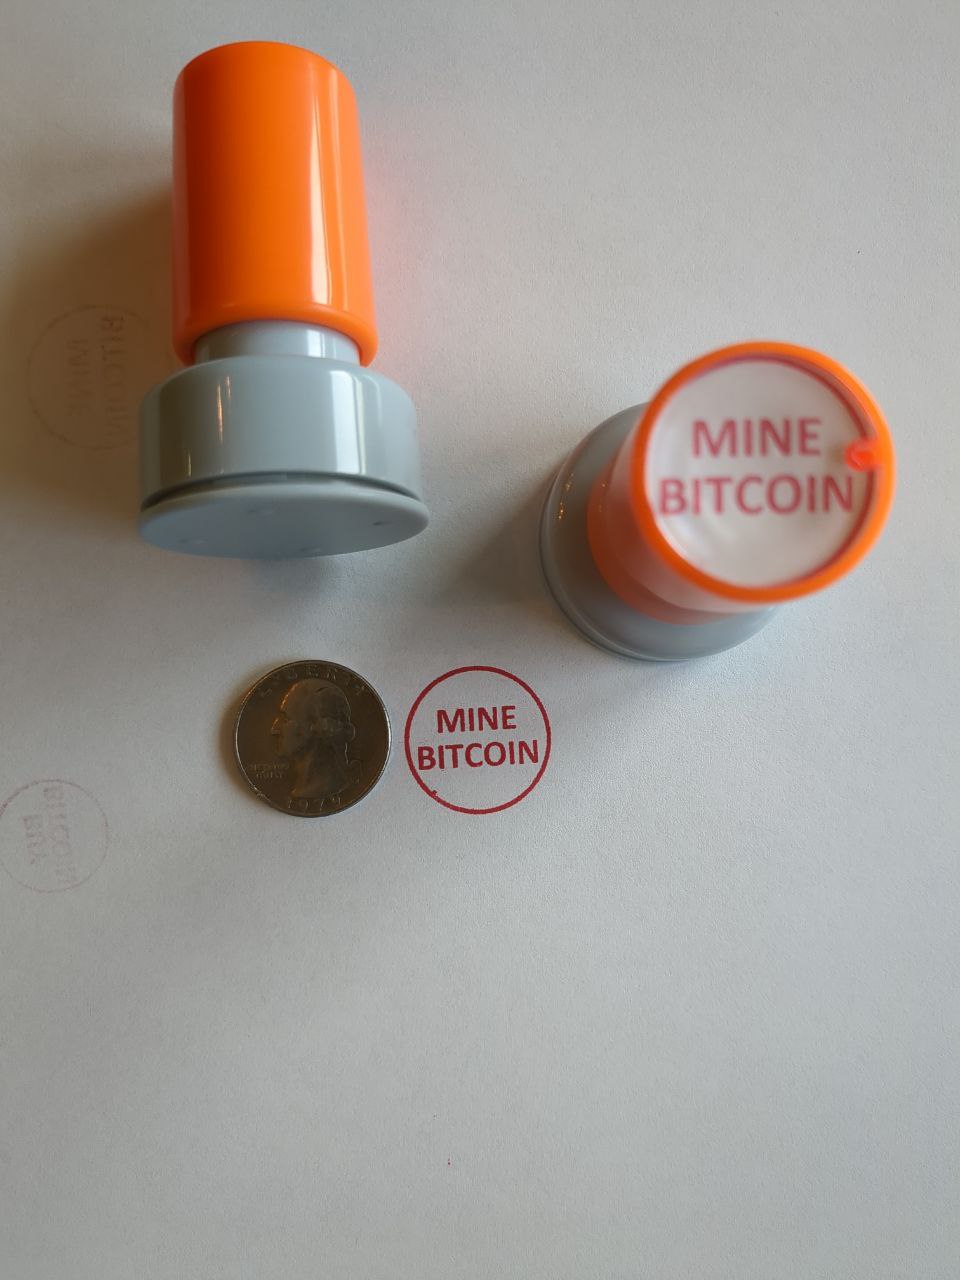 Mine Bitcoin Stamp - 1 Stamp add-on to an existing order